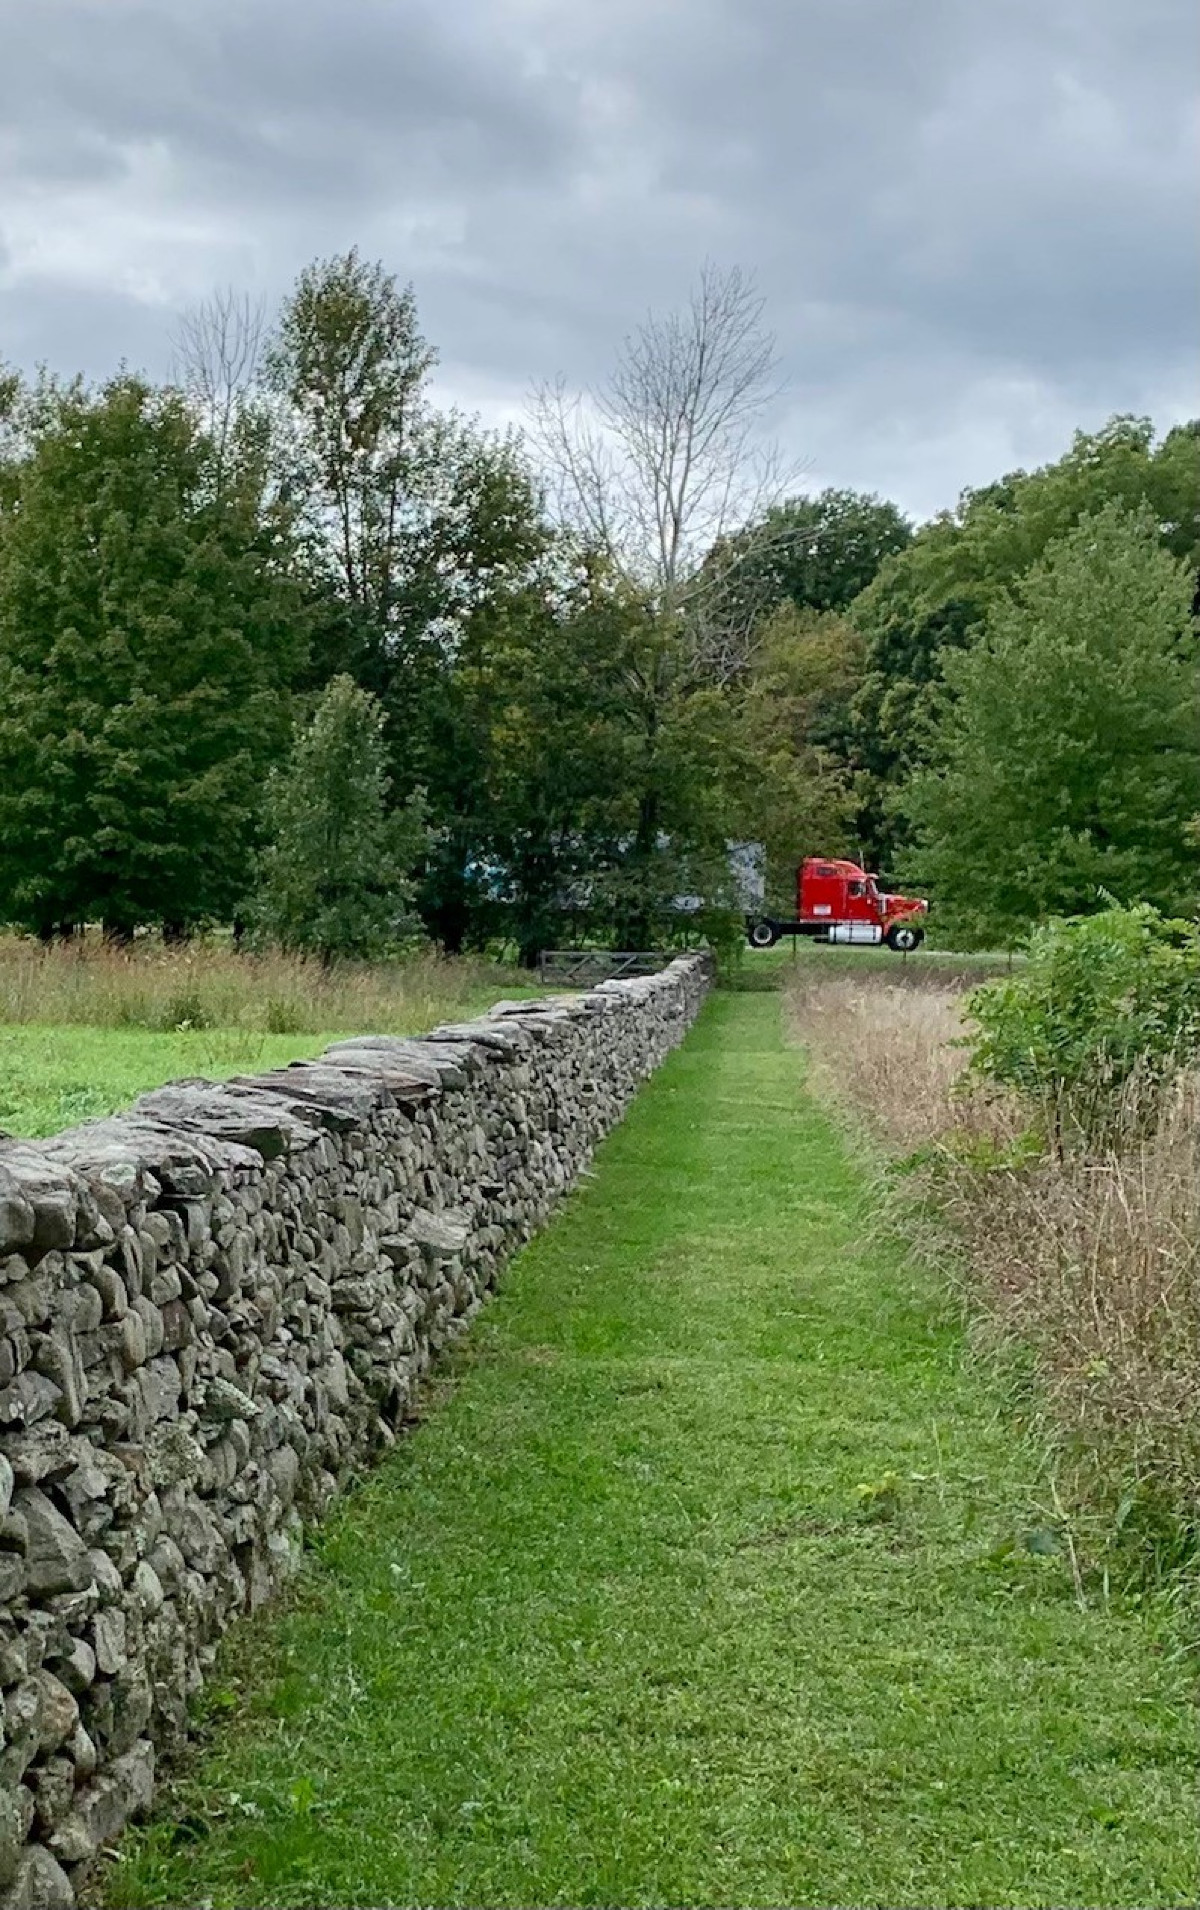 Andy Goldsworthy, <i>Storm King Wall</i>, 1997&ndash;98<br />
New York State Thruway and the Storm King Art Center, 2022